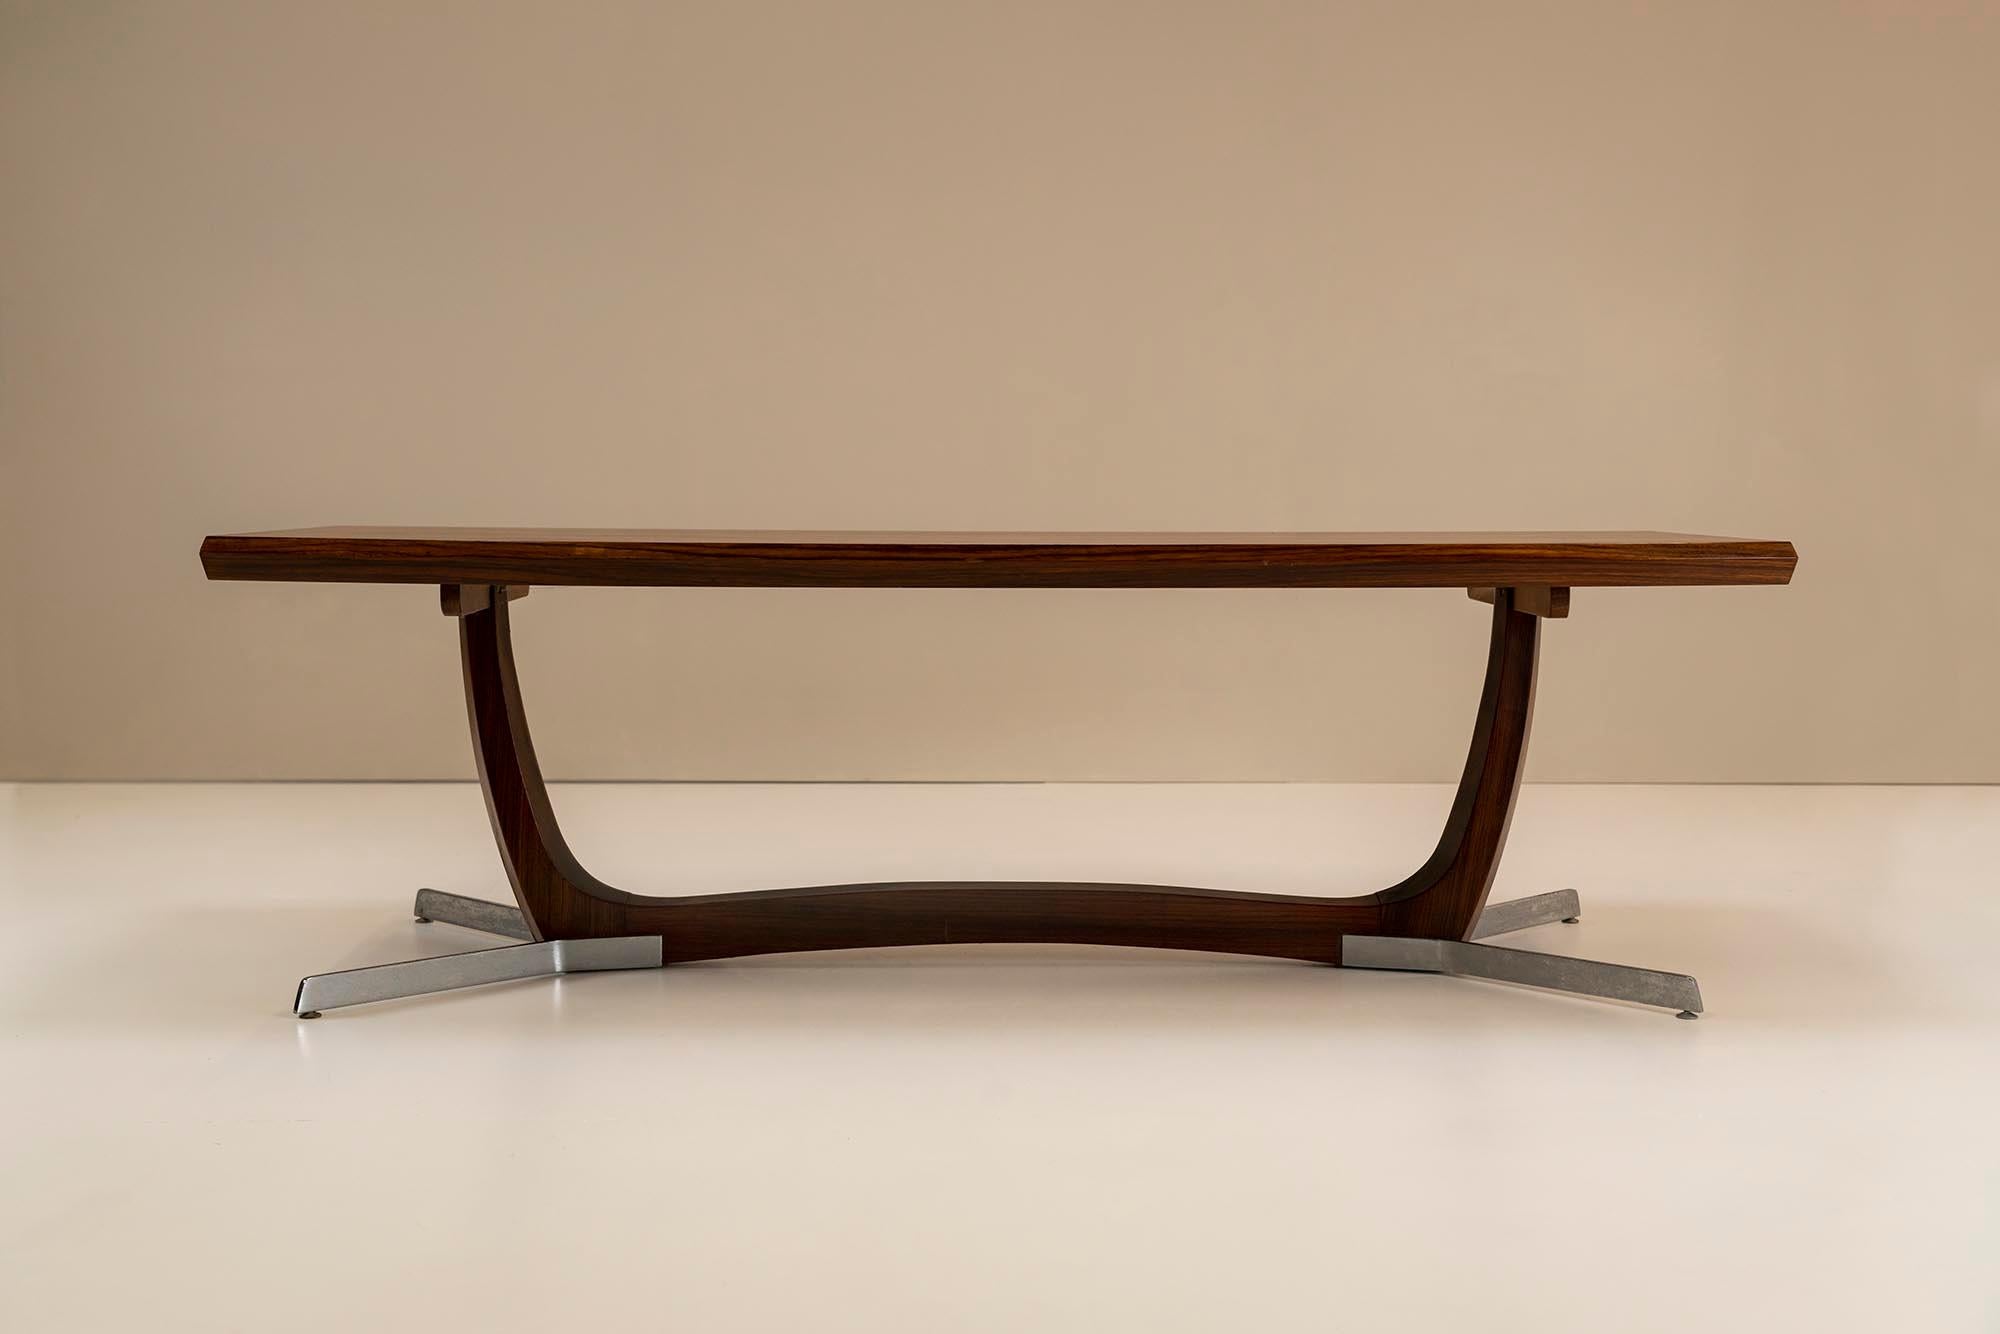 Architectural large coffee table with an organically shaped base in rosewood veneer and metal from the 1960s. A very impressive sight when walking into a room and laying your eyes upon this architectural coffee table. Well-constructed and neatly